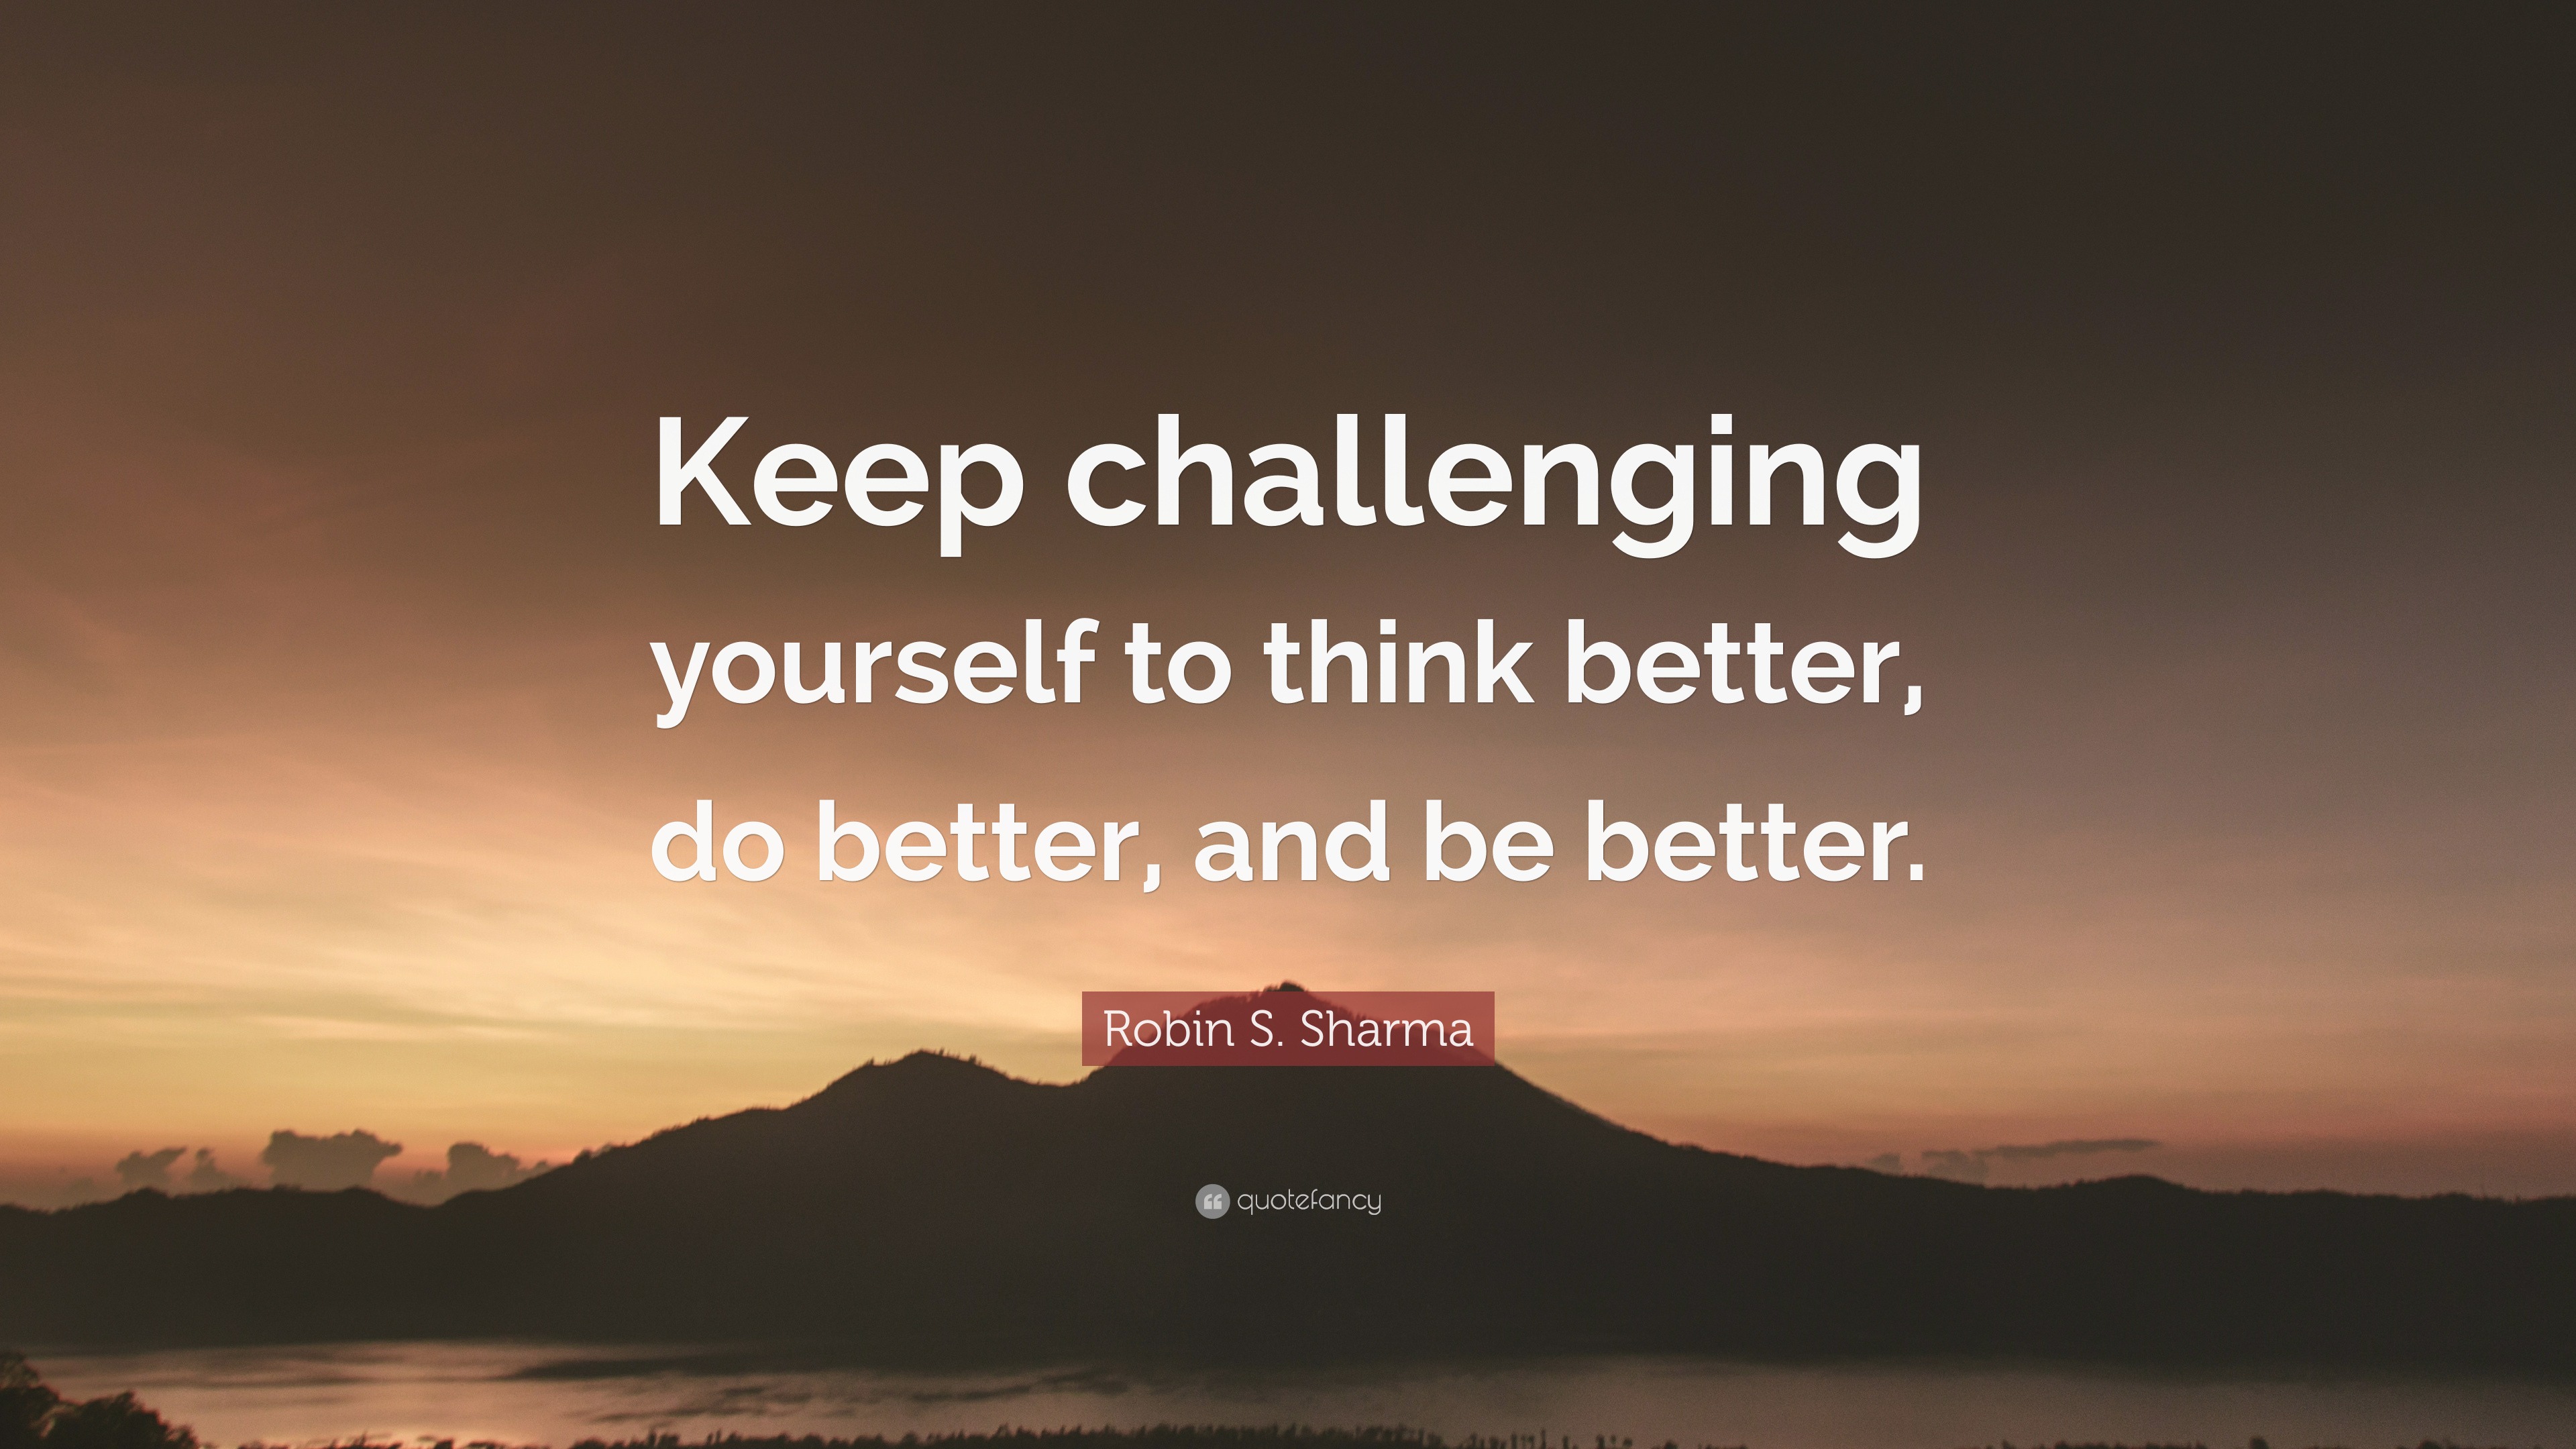 Robin S. Sharma Quote “Keep challenging yourself to think better, do